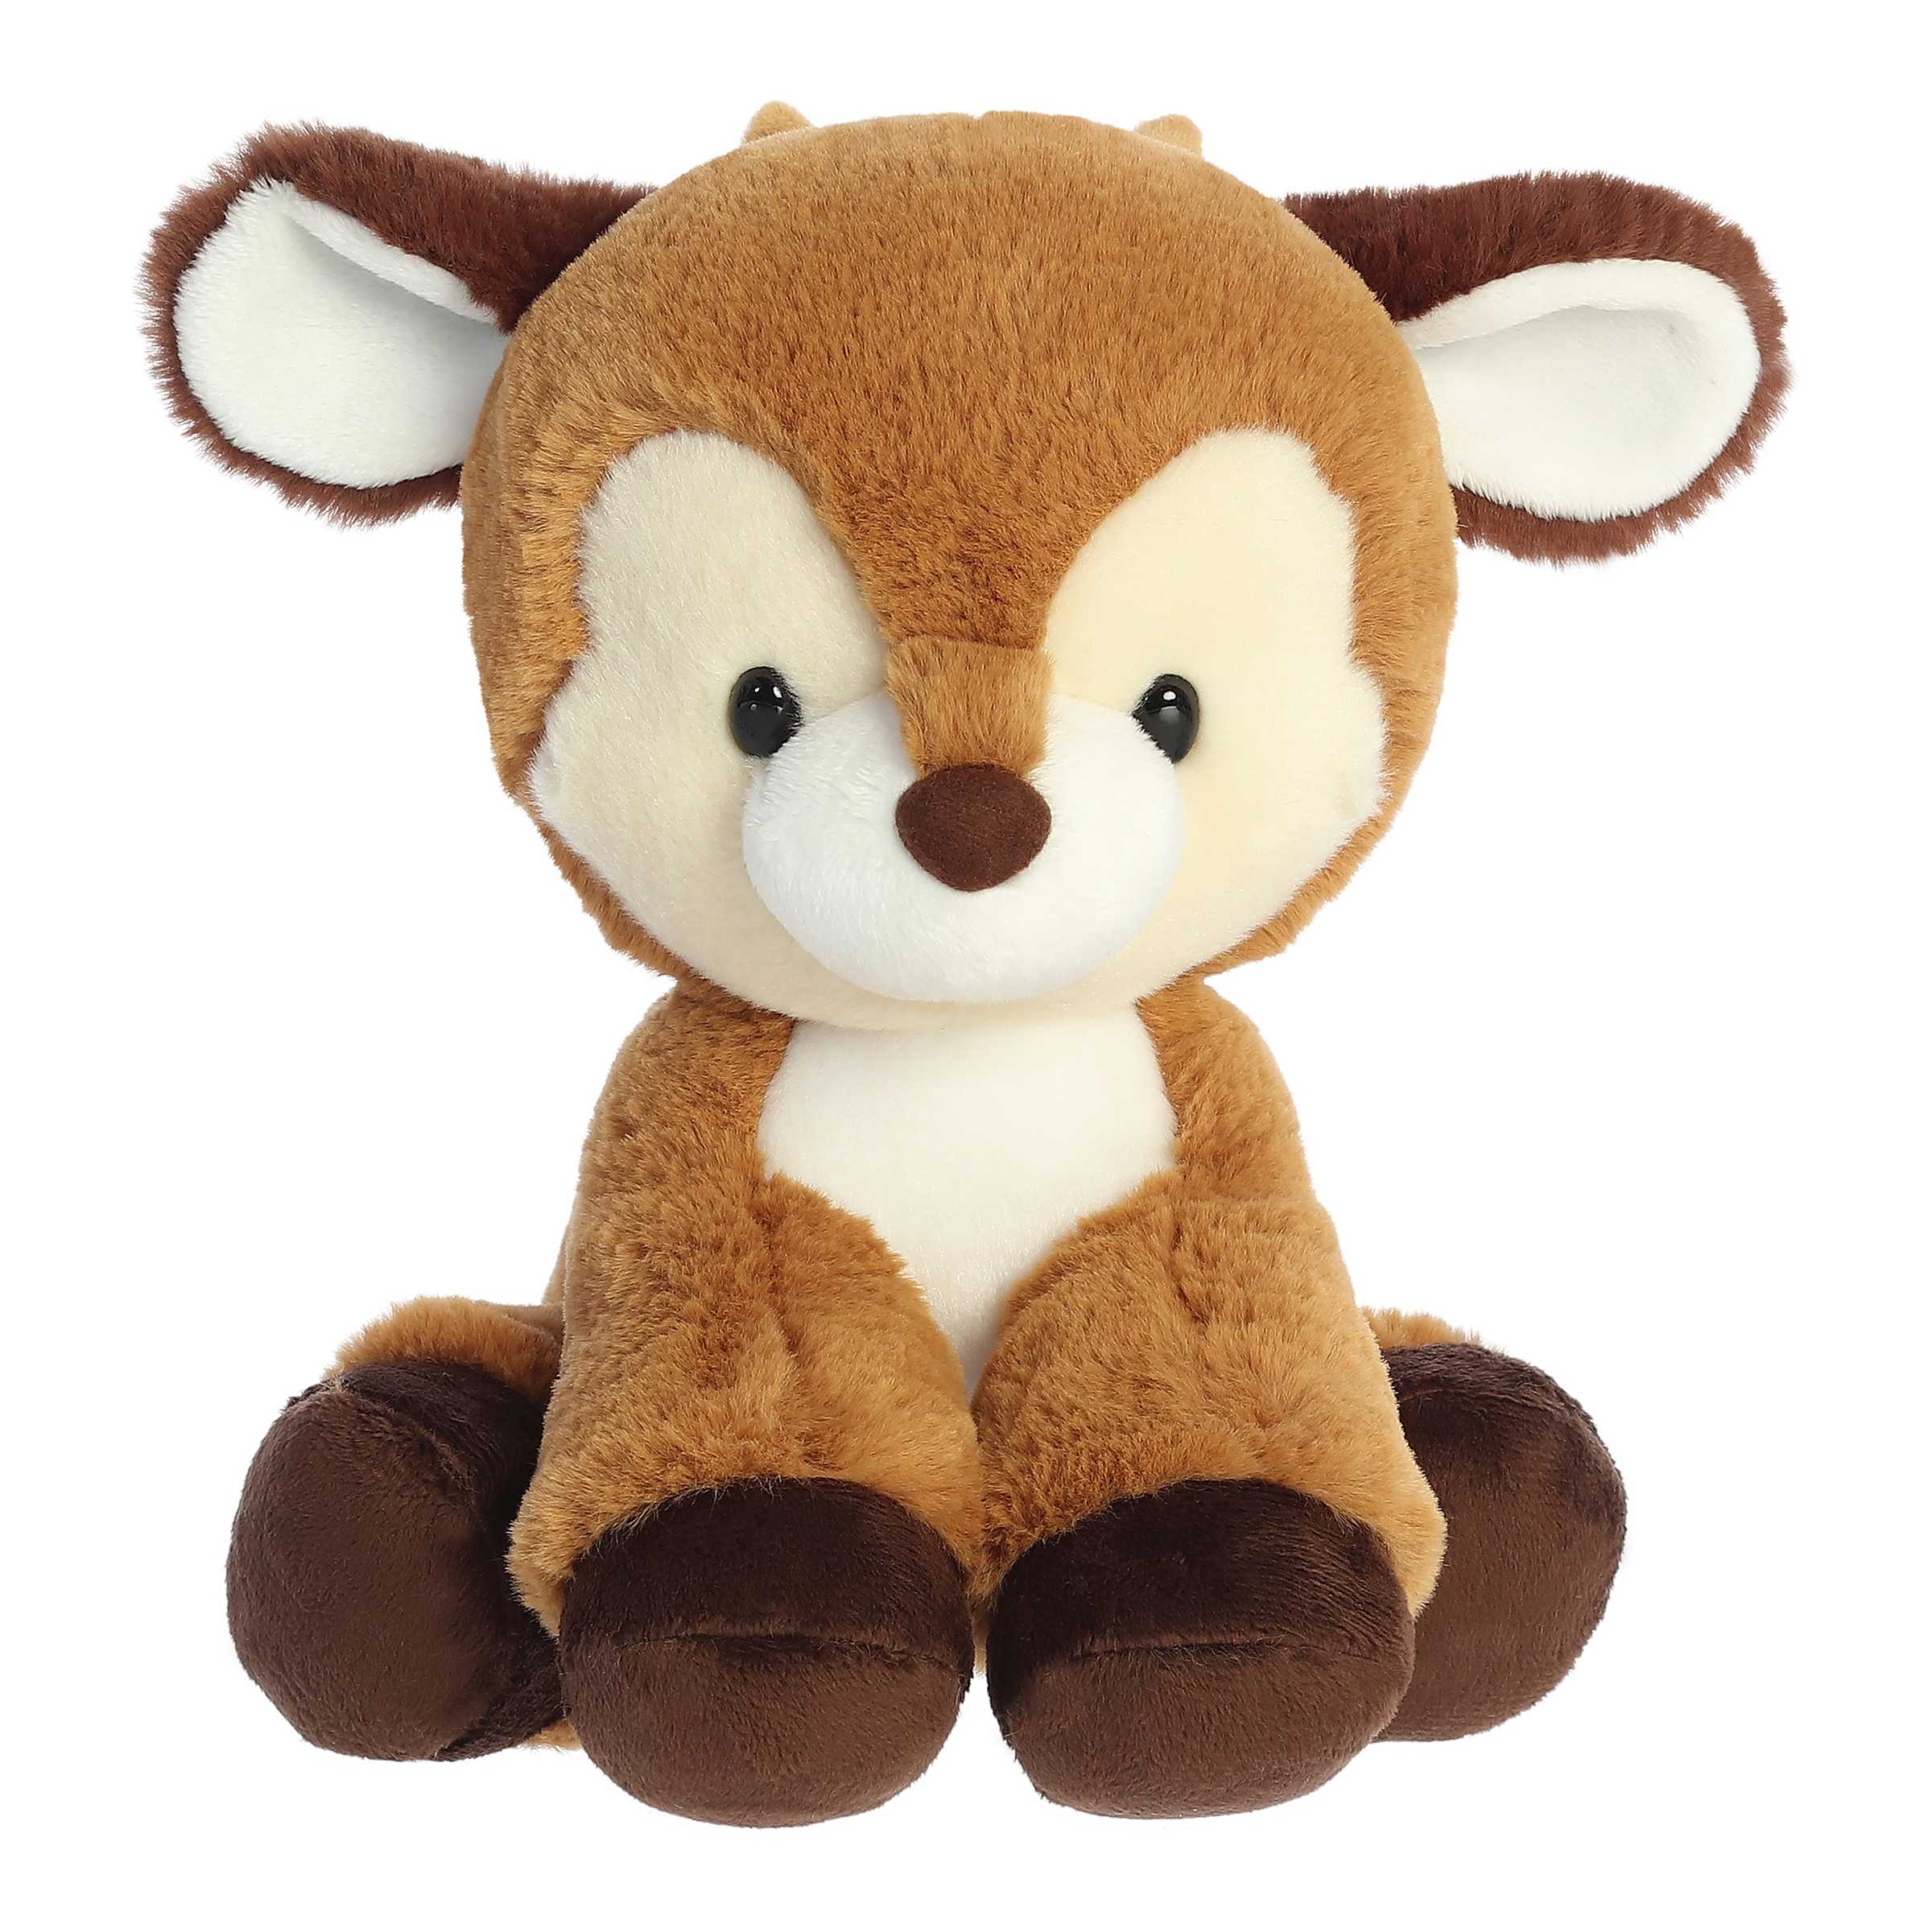 Adorable brown reindeer plush toy in a sitting position with tiny horns and dark brown accents on the ears and feet pads